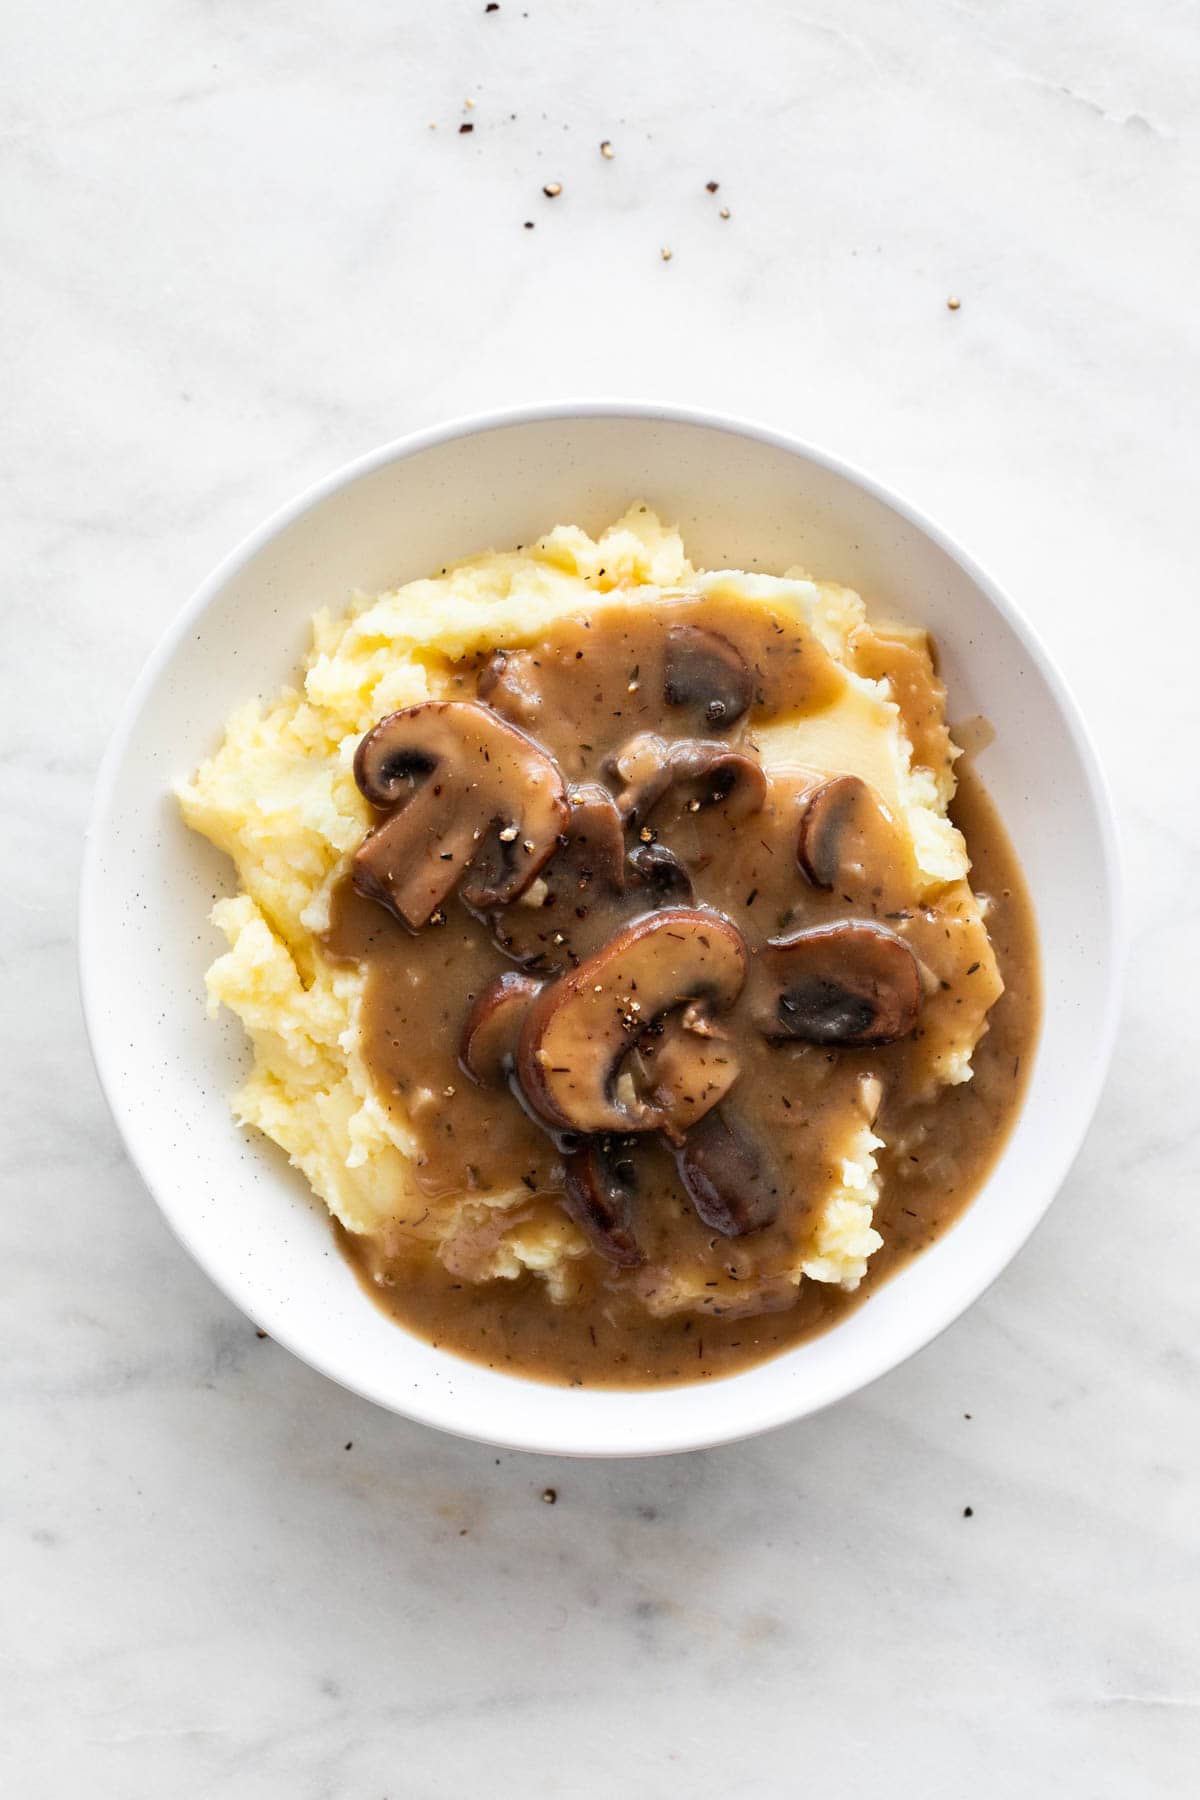 Plate with vegan mashed potatoes and vegan mushroom gravy on a white background.